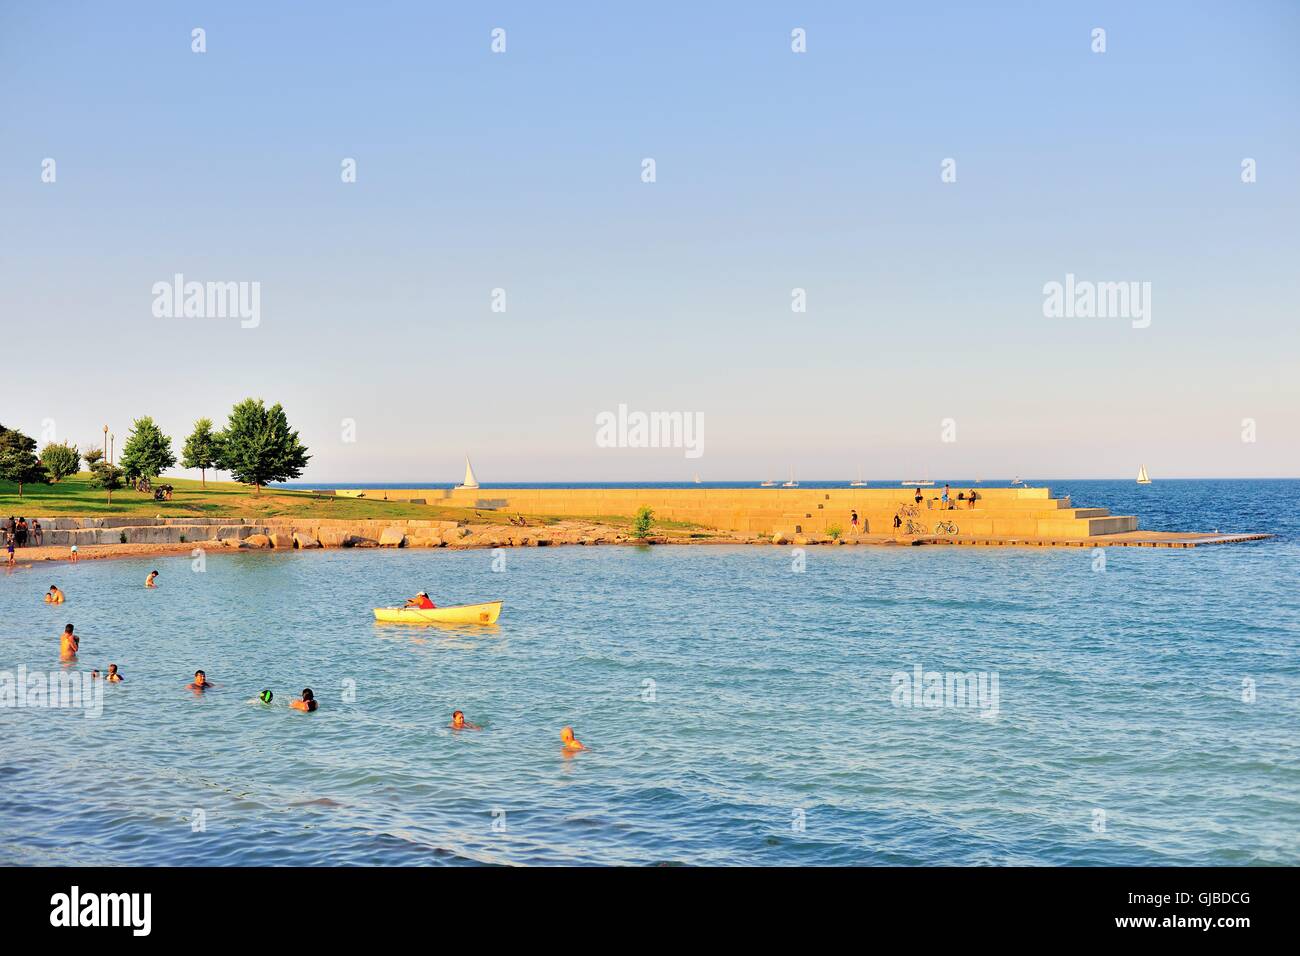 12th Street Beach Stock Photos and Images - 123RF